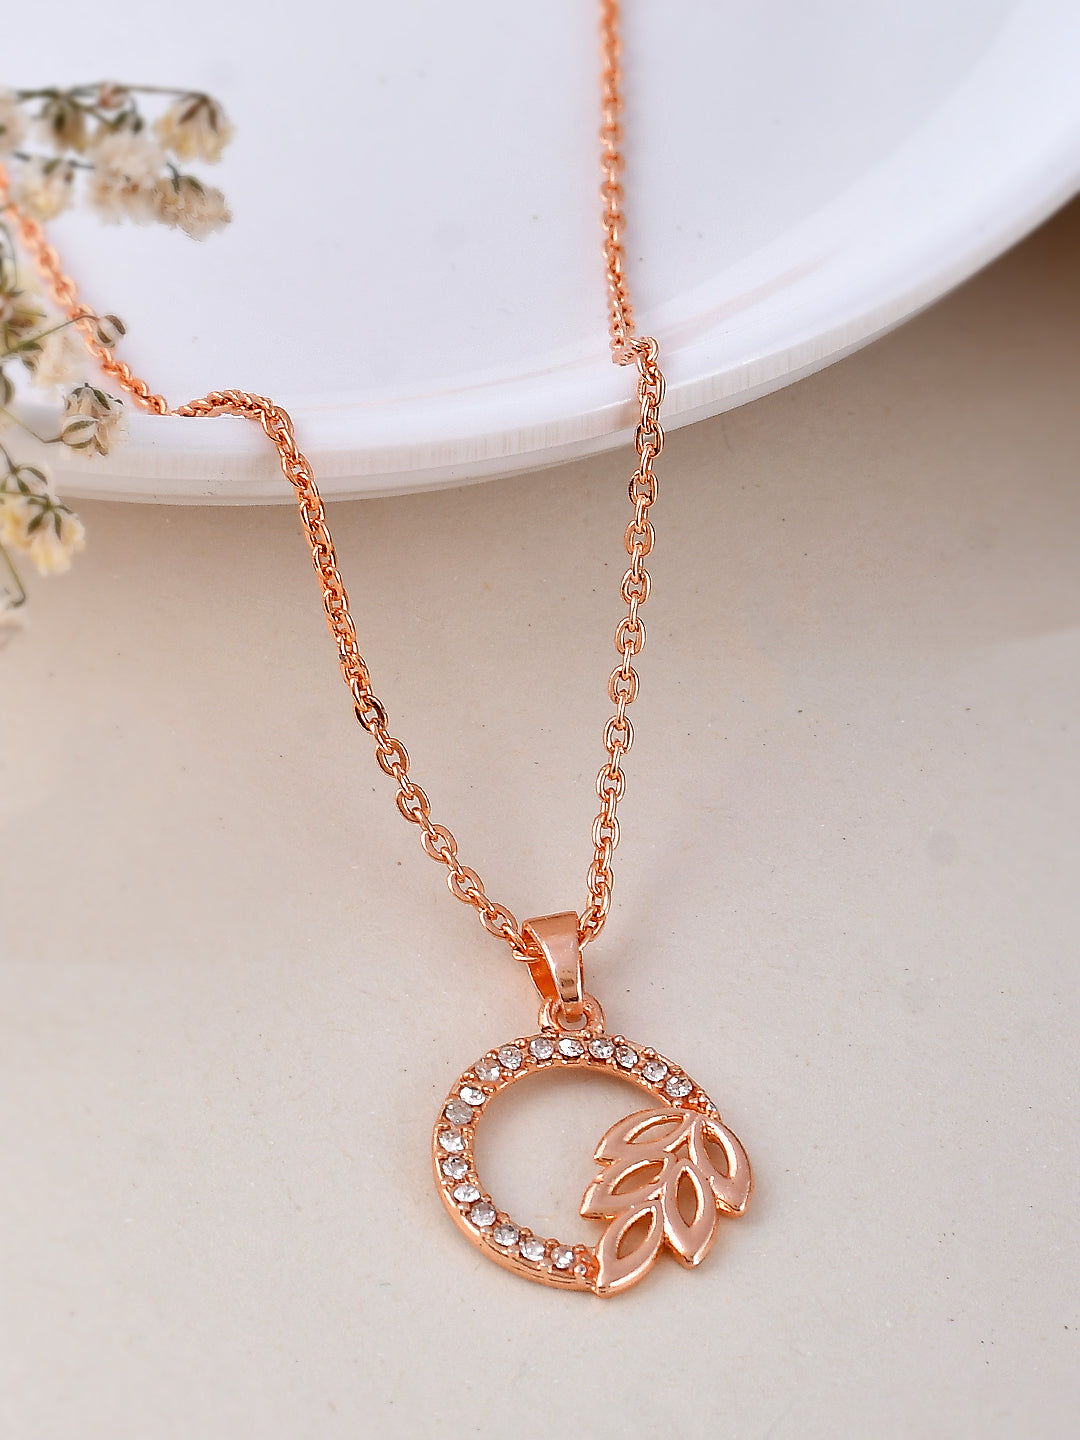 Rose Gold Pendant Chains for Women Online